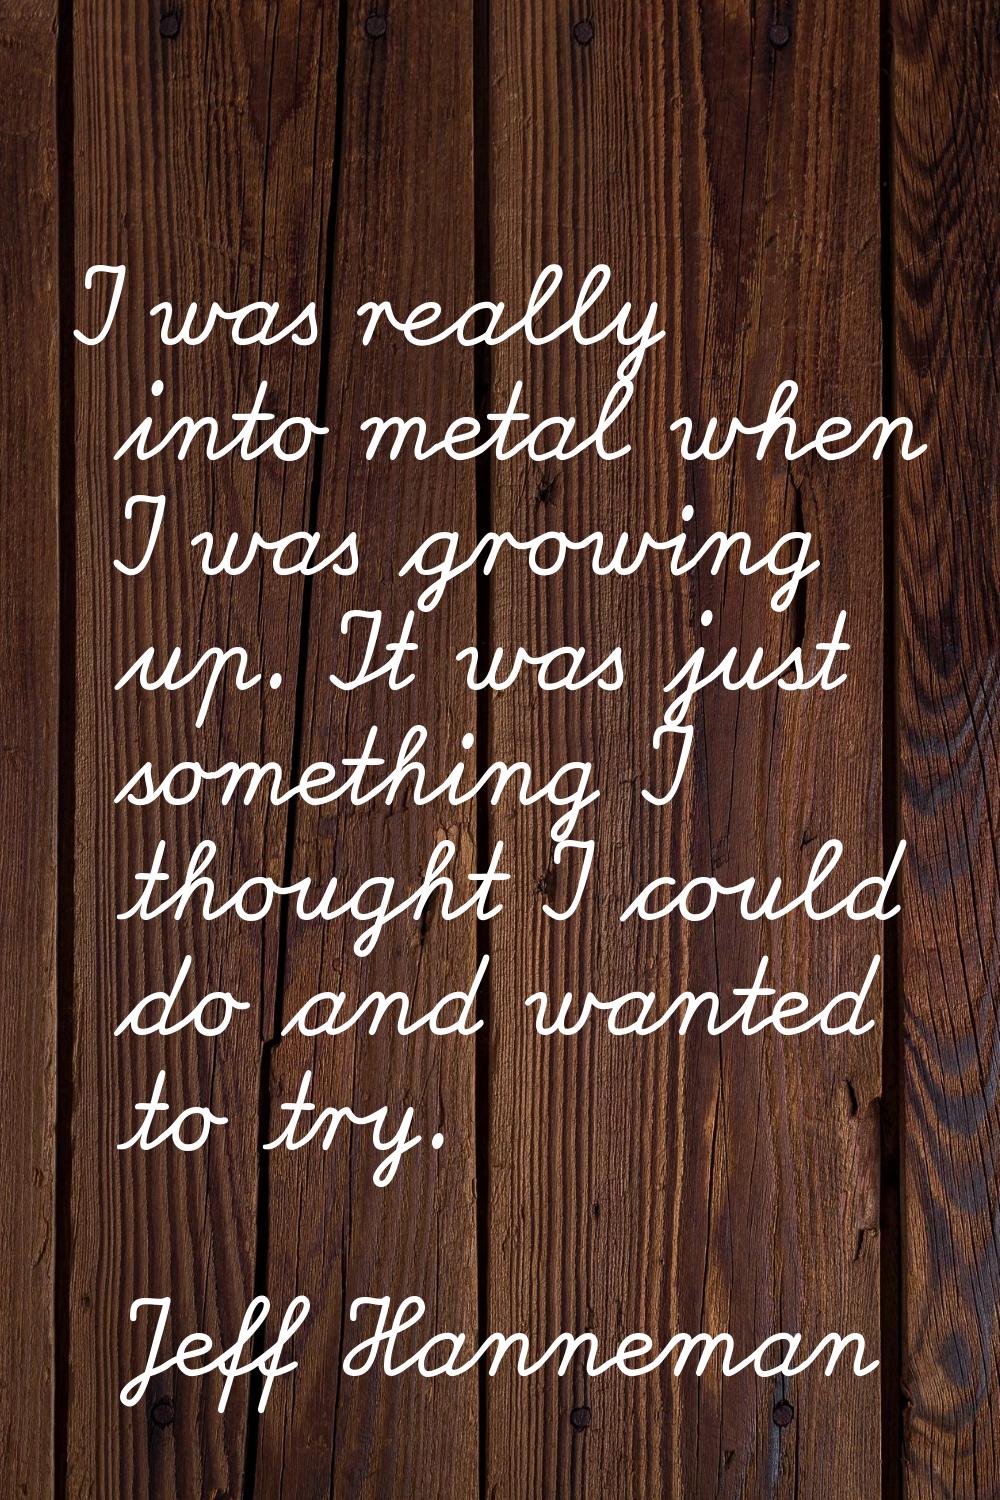 I was really into metal when I was growing up. It was just something I thought I could do and wante